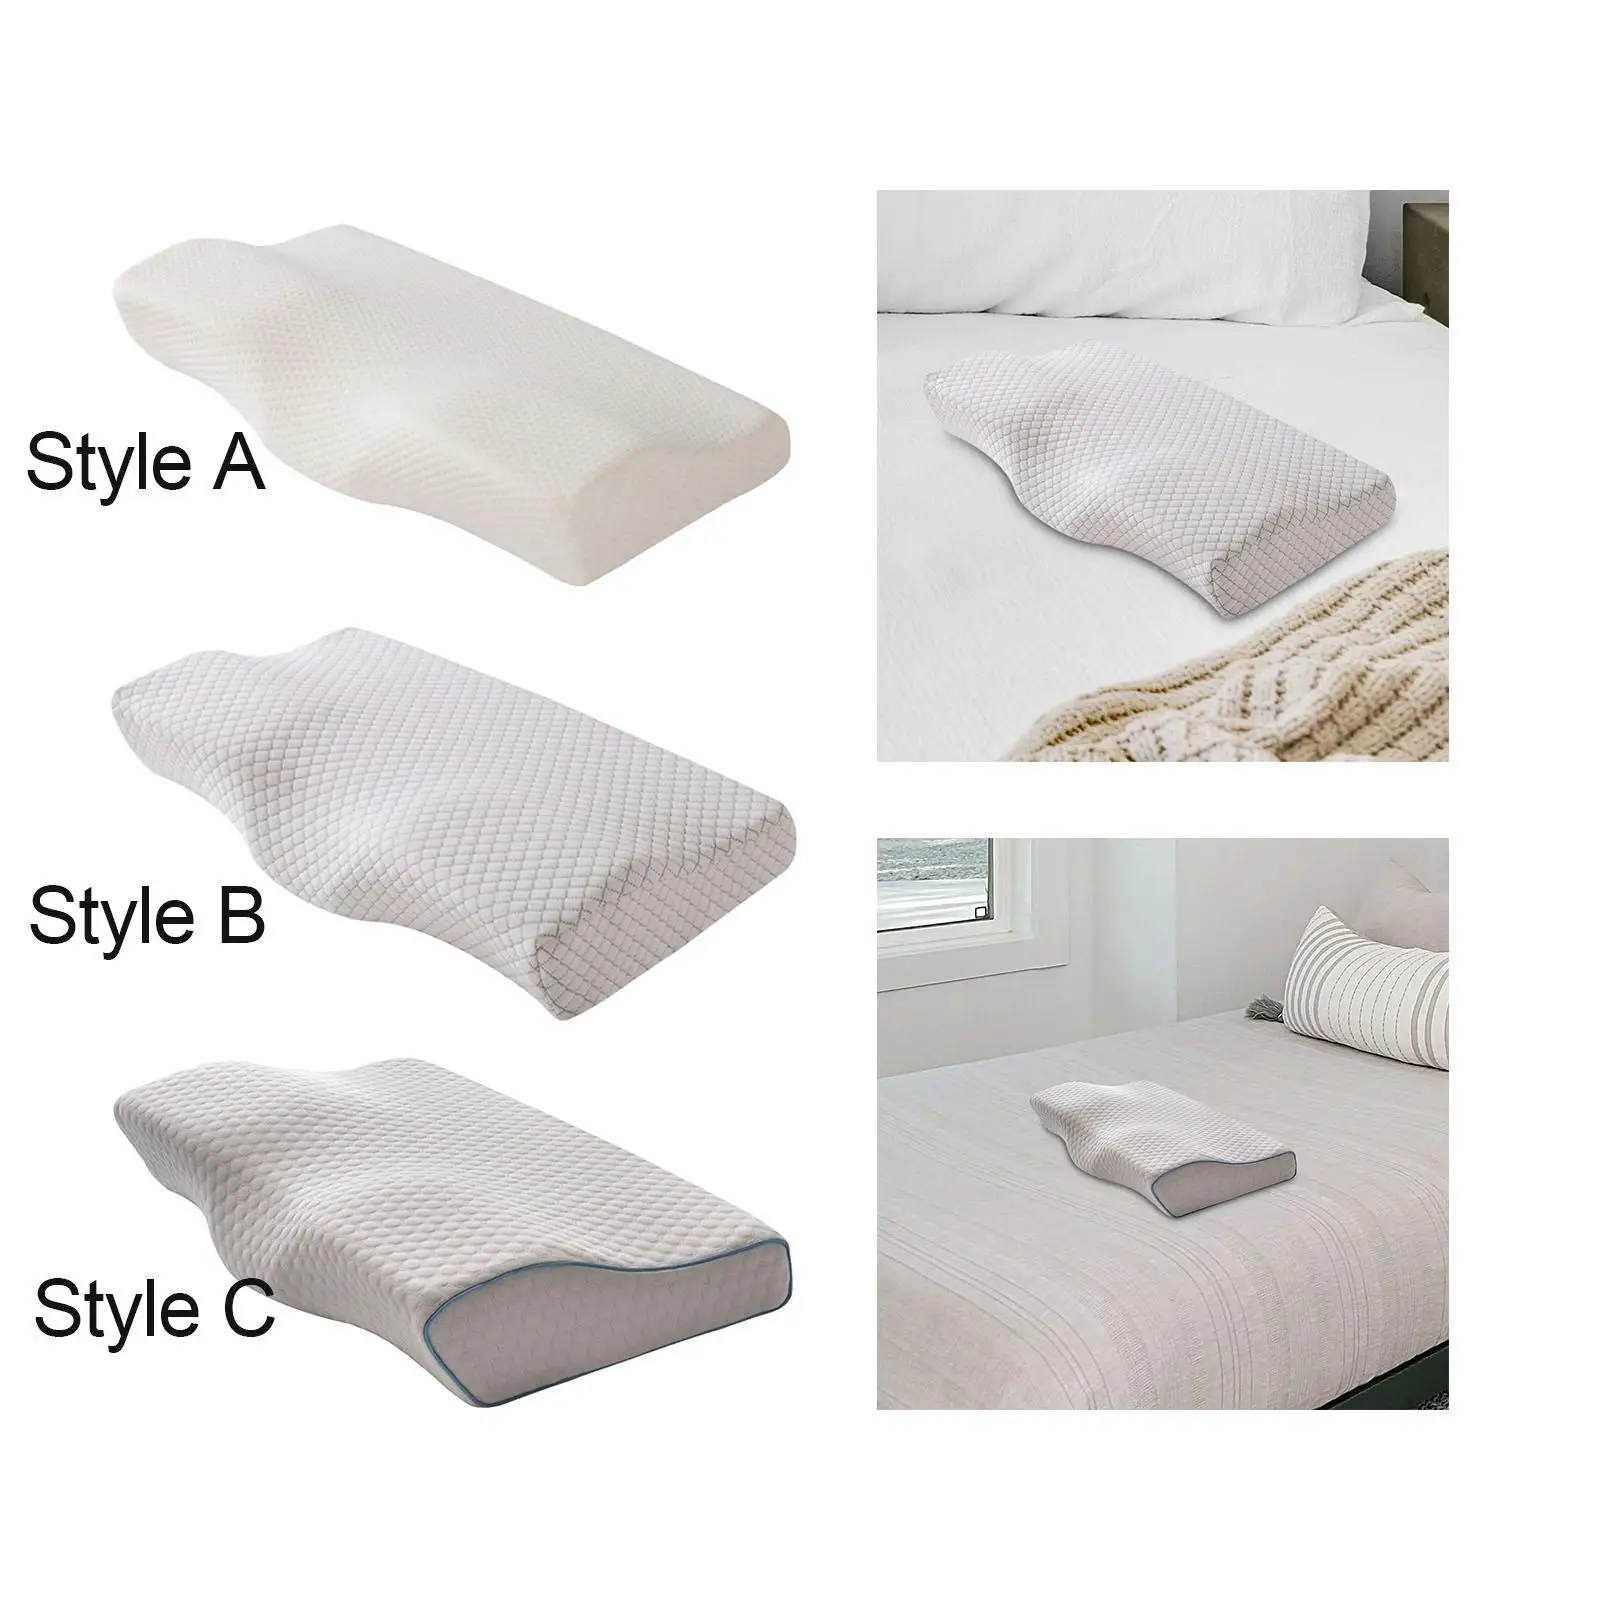 Cervical Memory Foam Pillow Neck Pillows for Side Sleepers Adult Bedroom